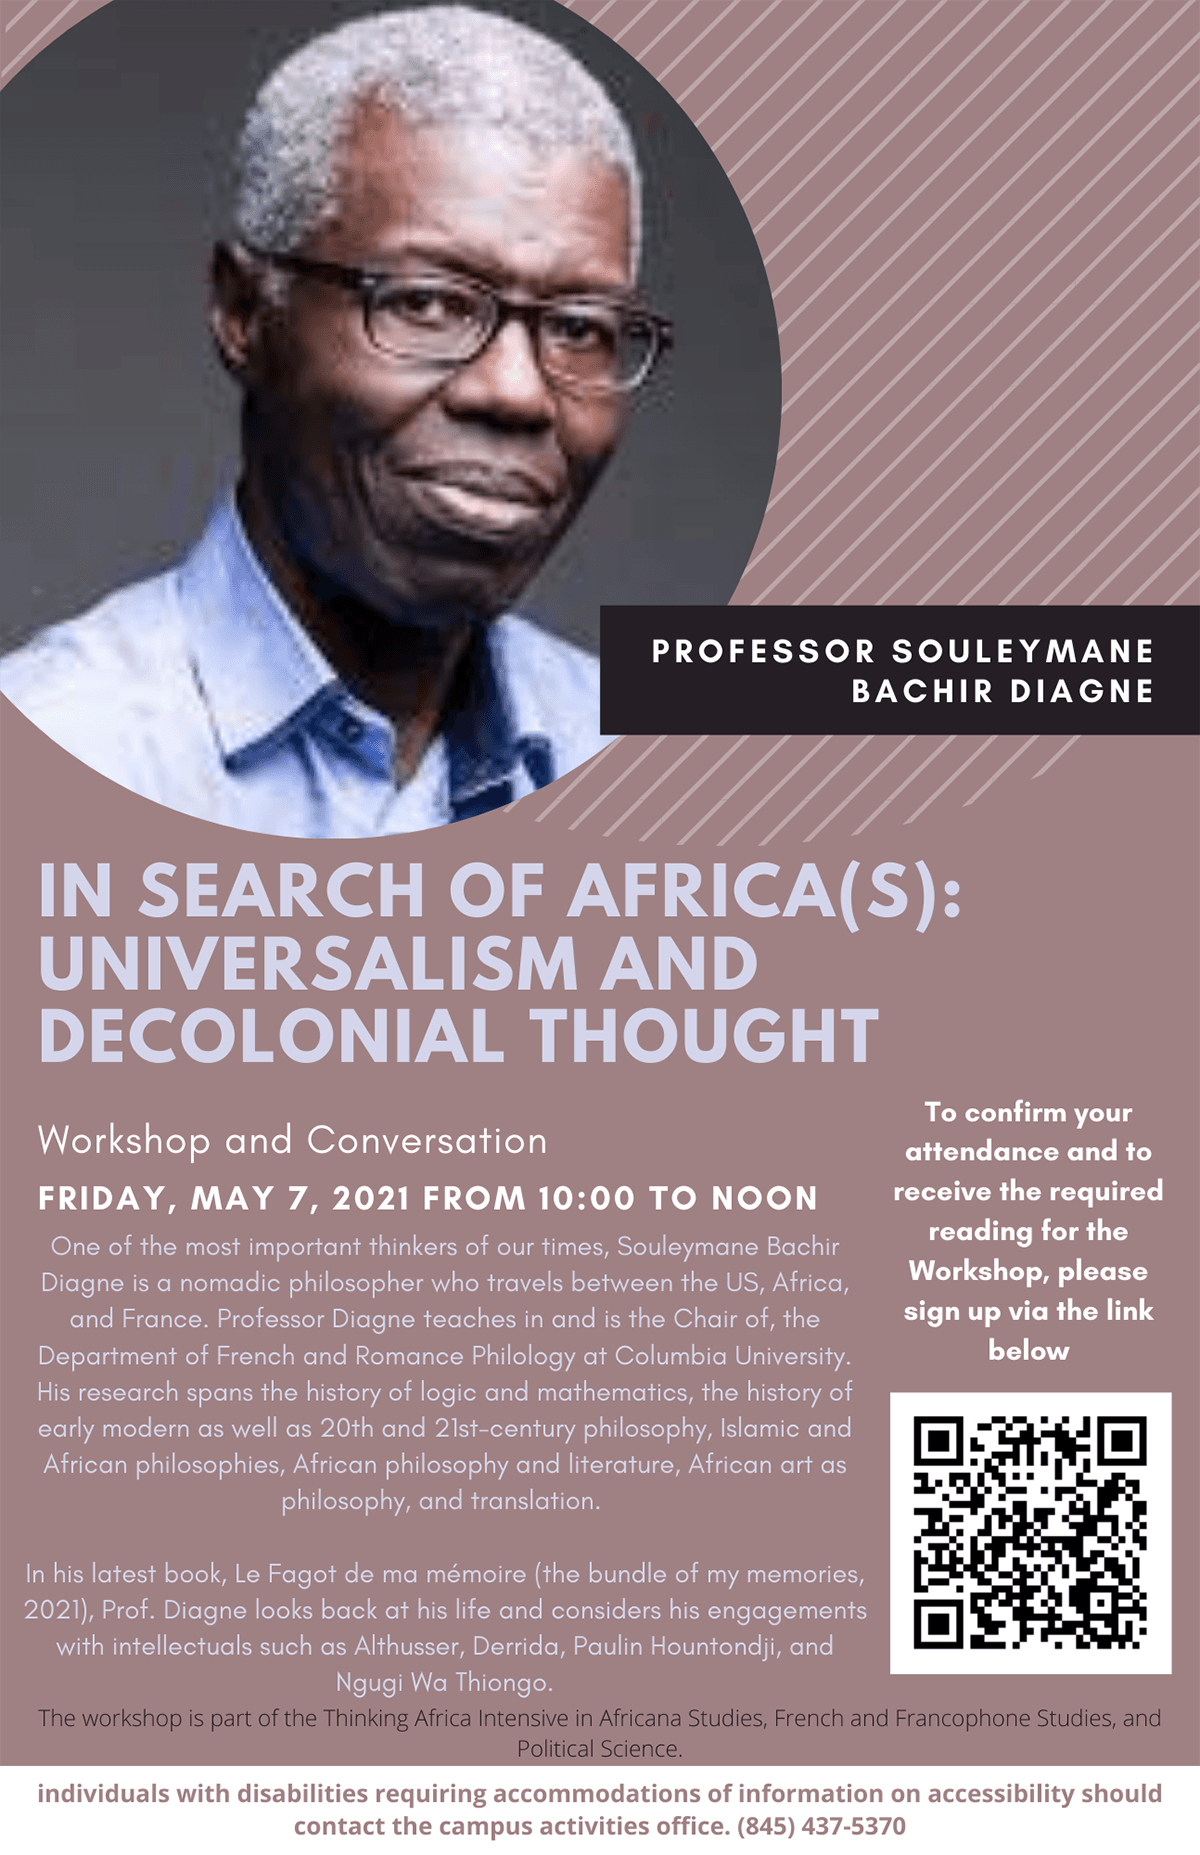 Professor Souleymane Bachir Diagne: “In Search of Africa’s Universalism and Decolonial Thought”. Friday May 7, 2021 from 10 to noon.